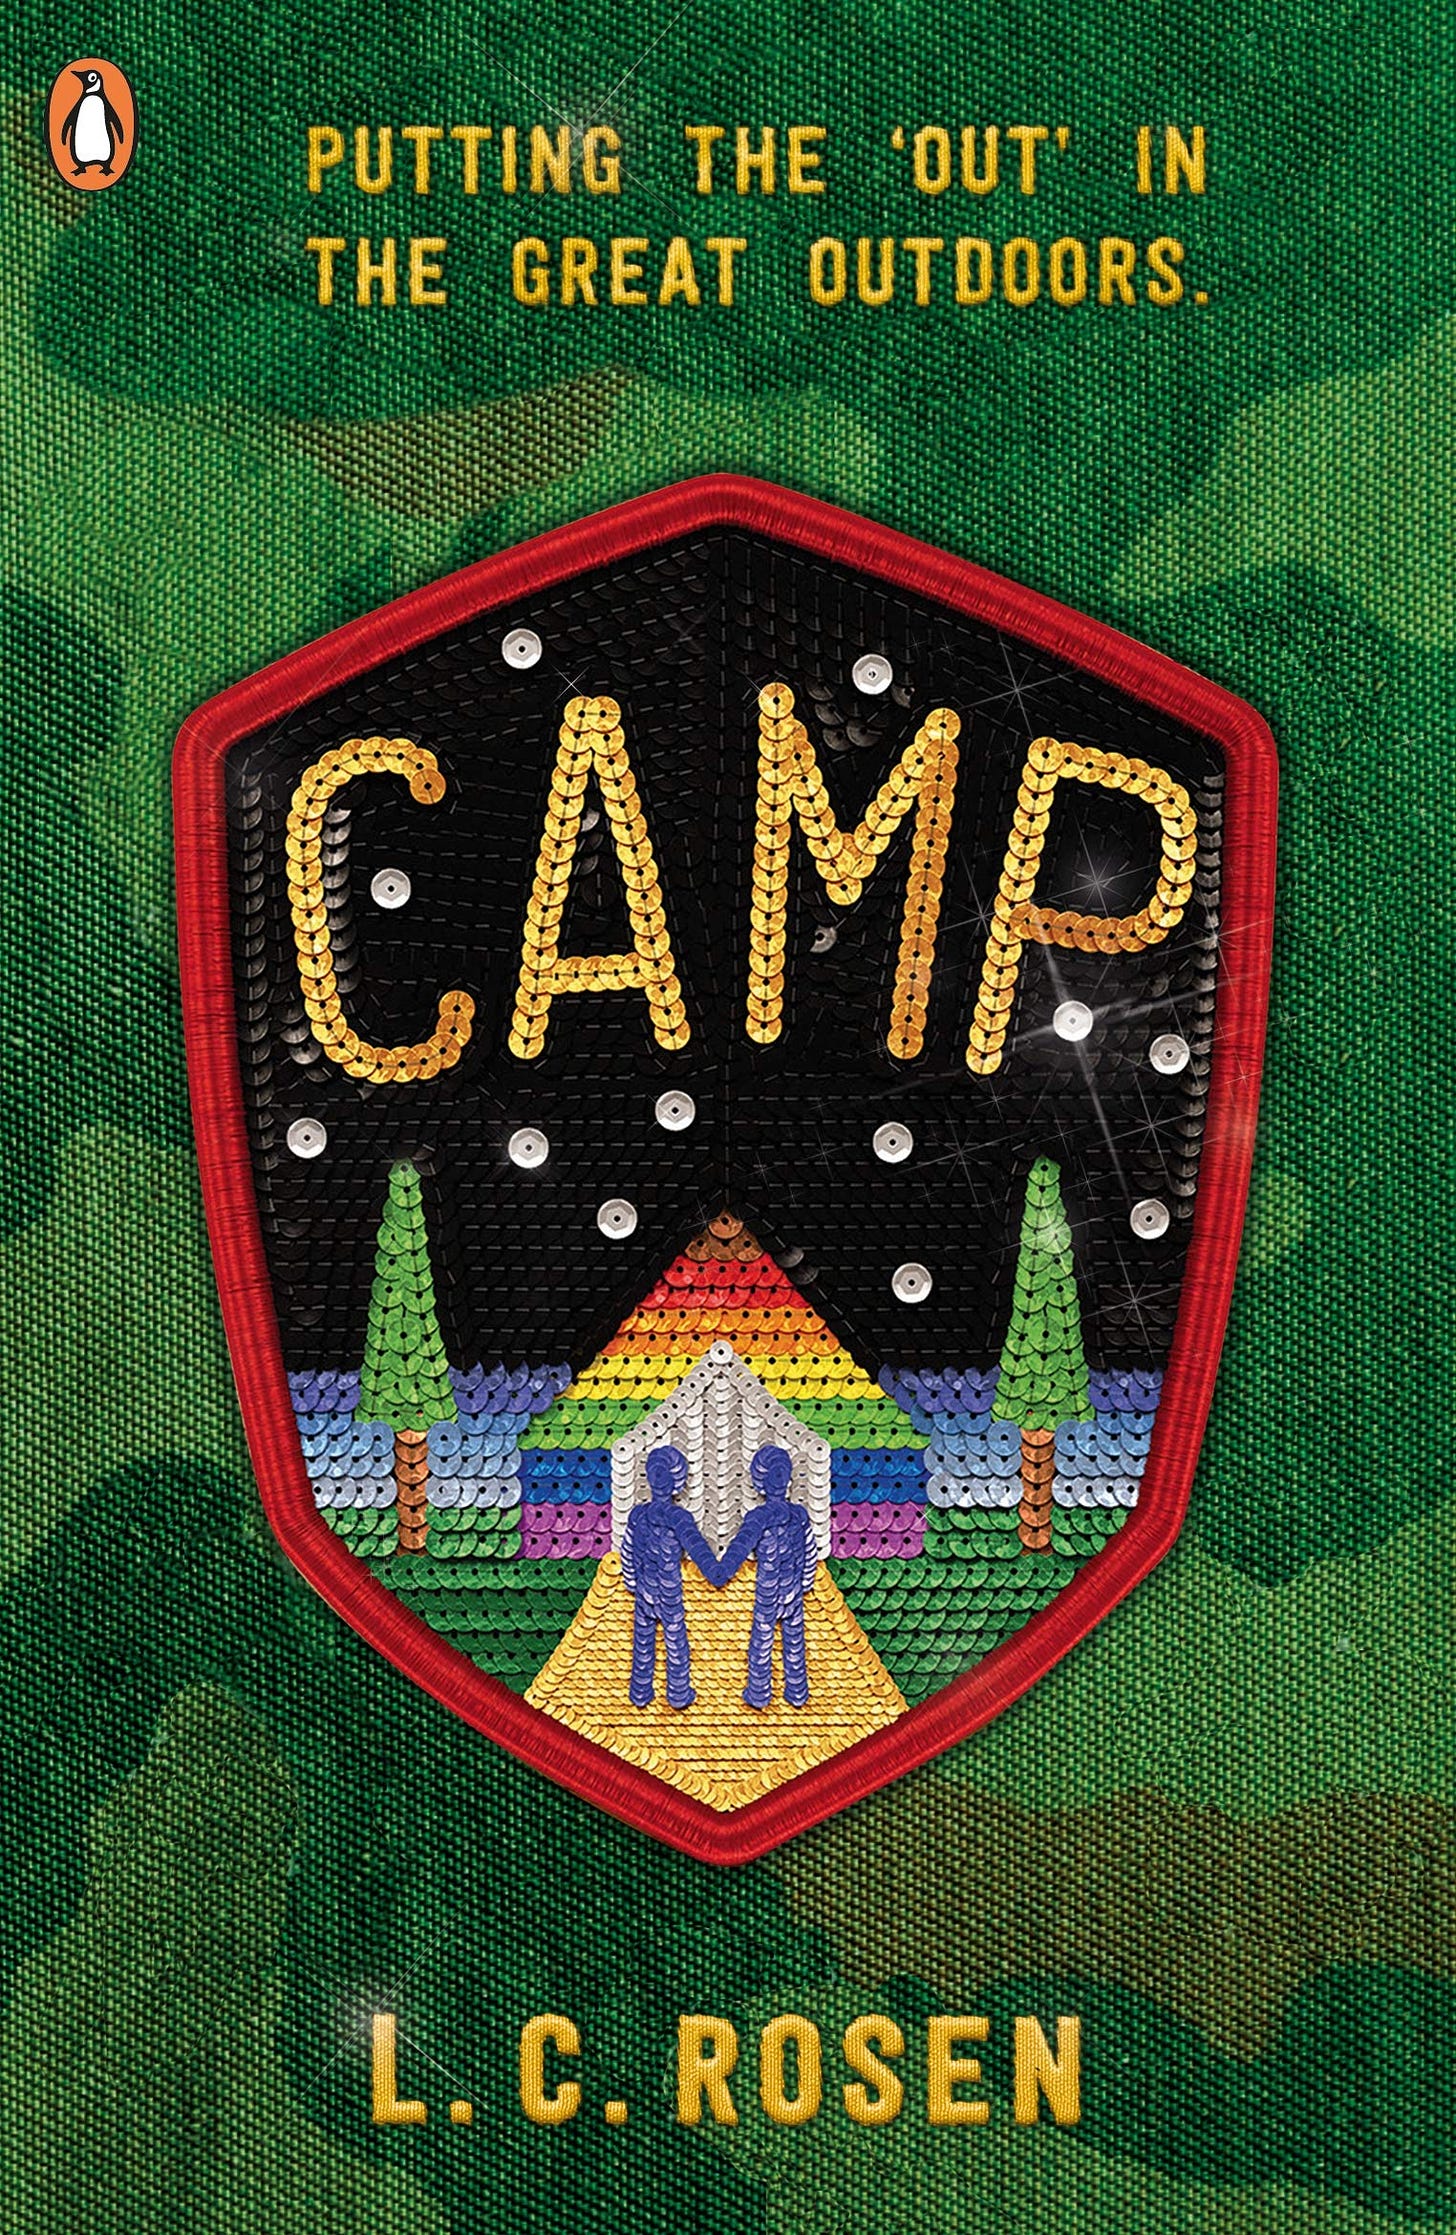 Cover of Camp by L. C. Rosen